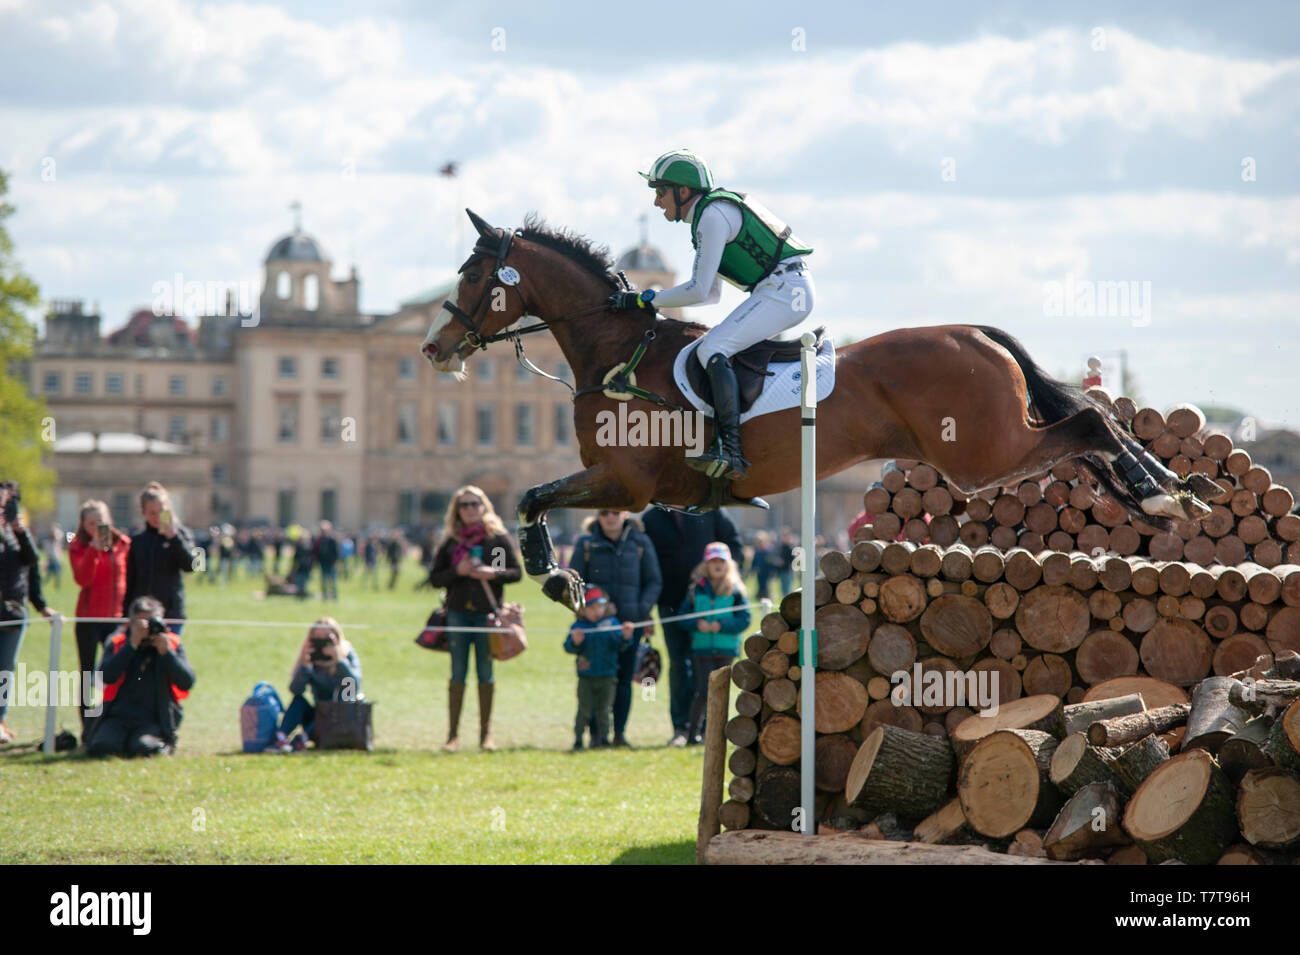 Badminton, Gloucestershire, United Kingdom, 4th May 2019, Michael Owen riding Bradeley Law during the Cross Country Phase of the 2019 Mitsubishi Motors Badminton Horse Trials, Credit:Jonathan Clarke/Alamy Stock Photo Stock Photo